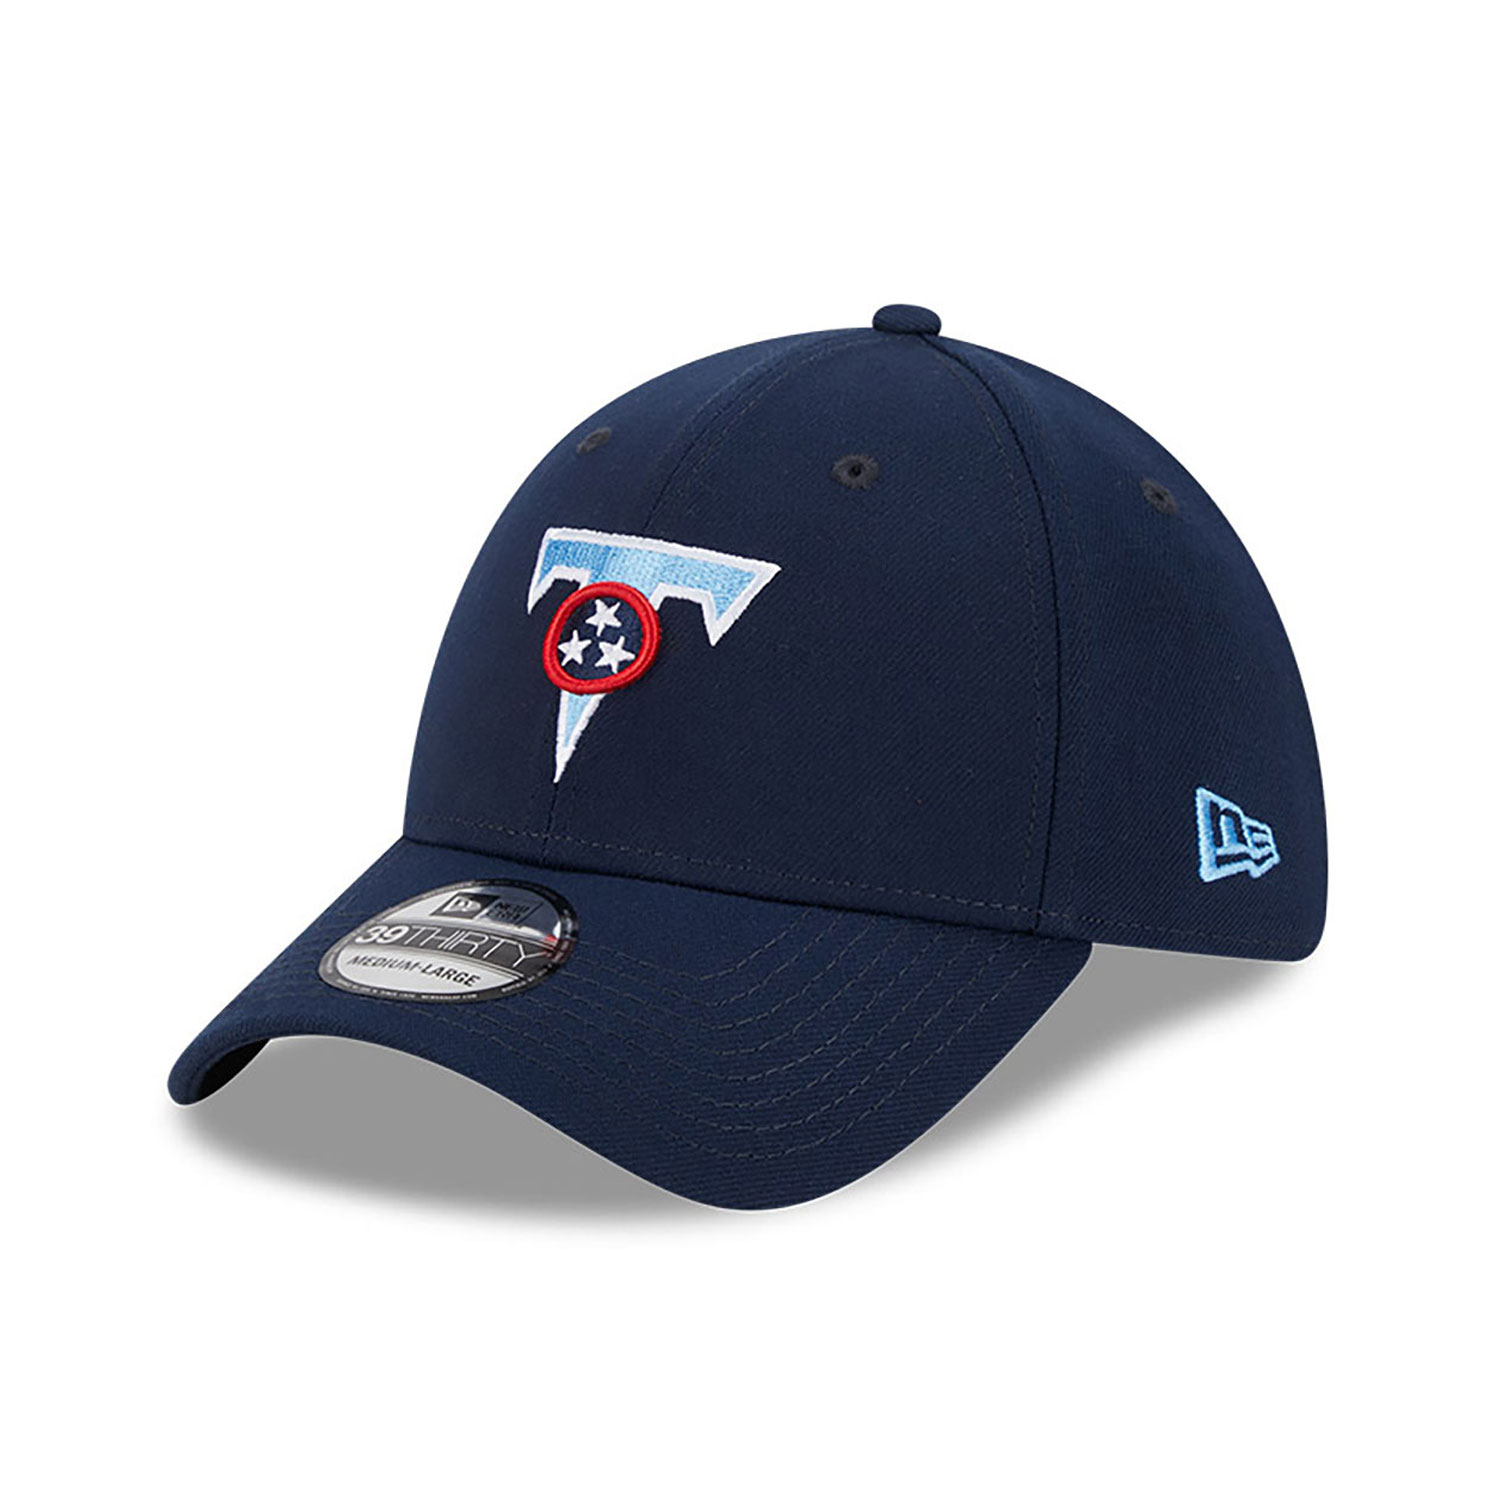 Tennessee Titans Caps, Hats & Clothing